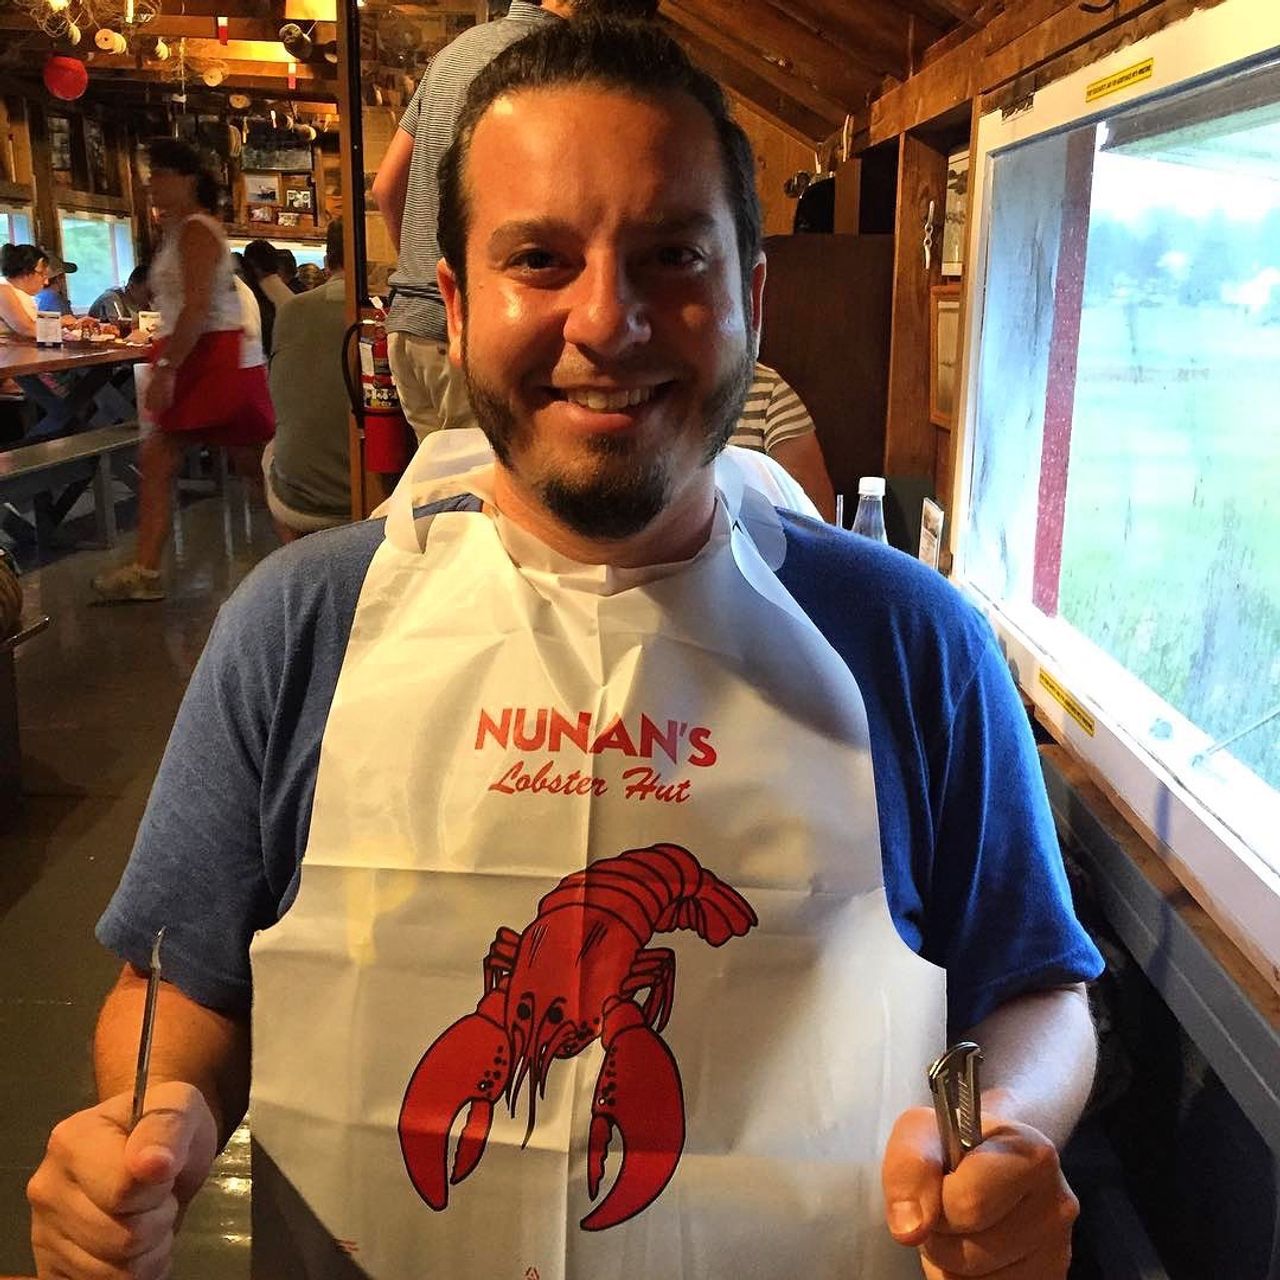 Man ready to eat lobster.